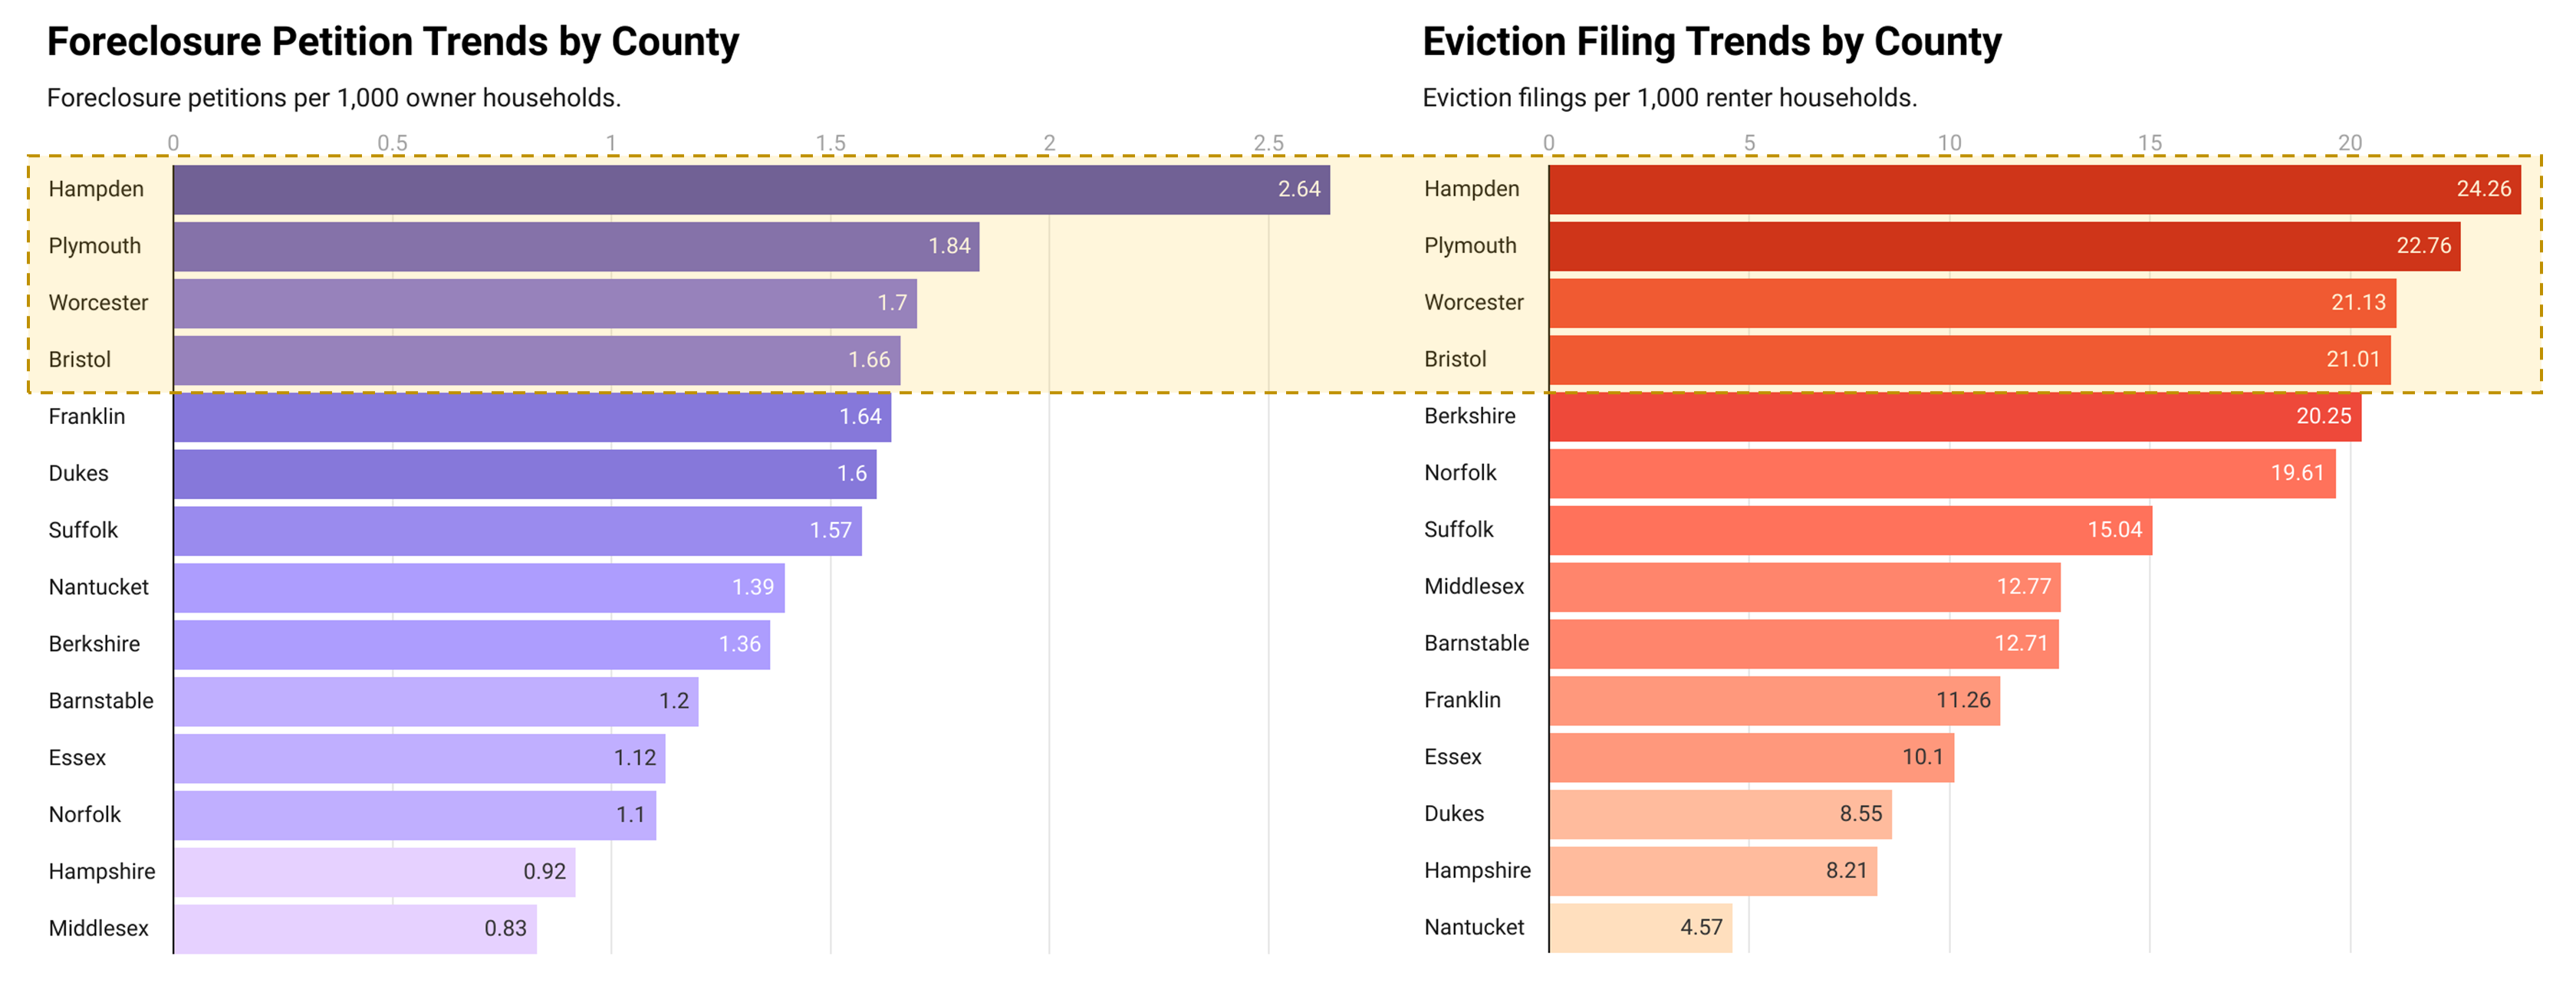 Evictions and Foreclosures